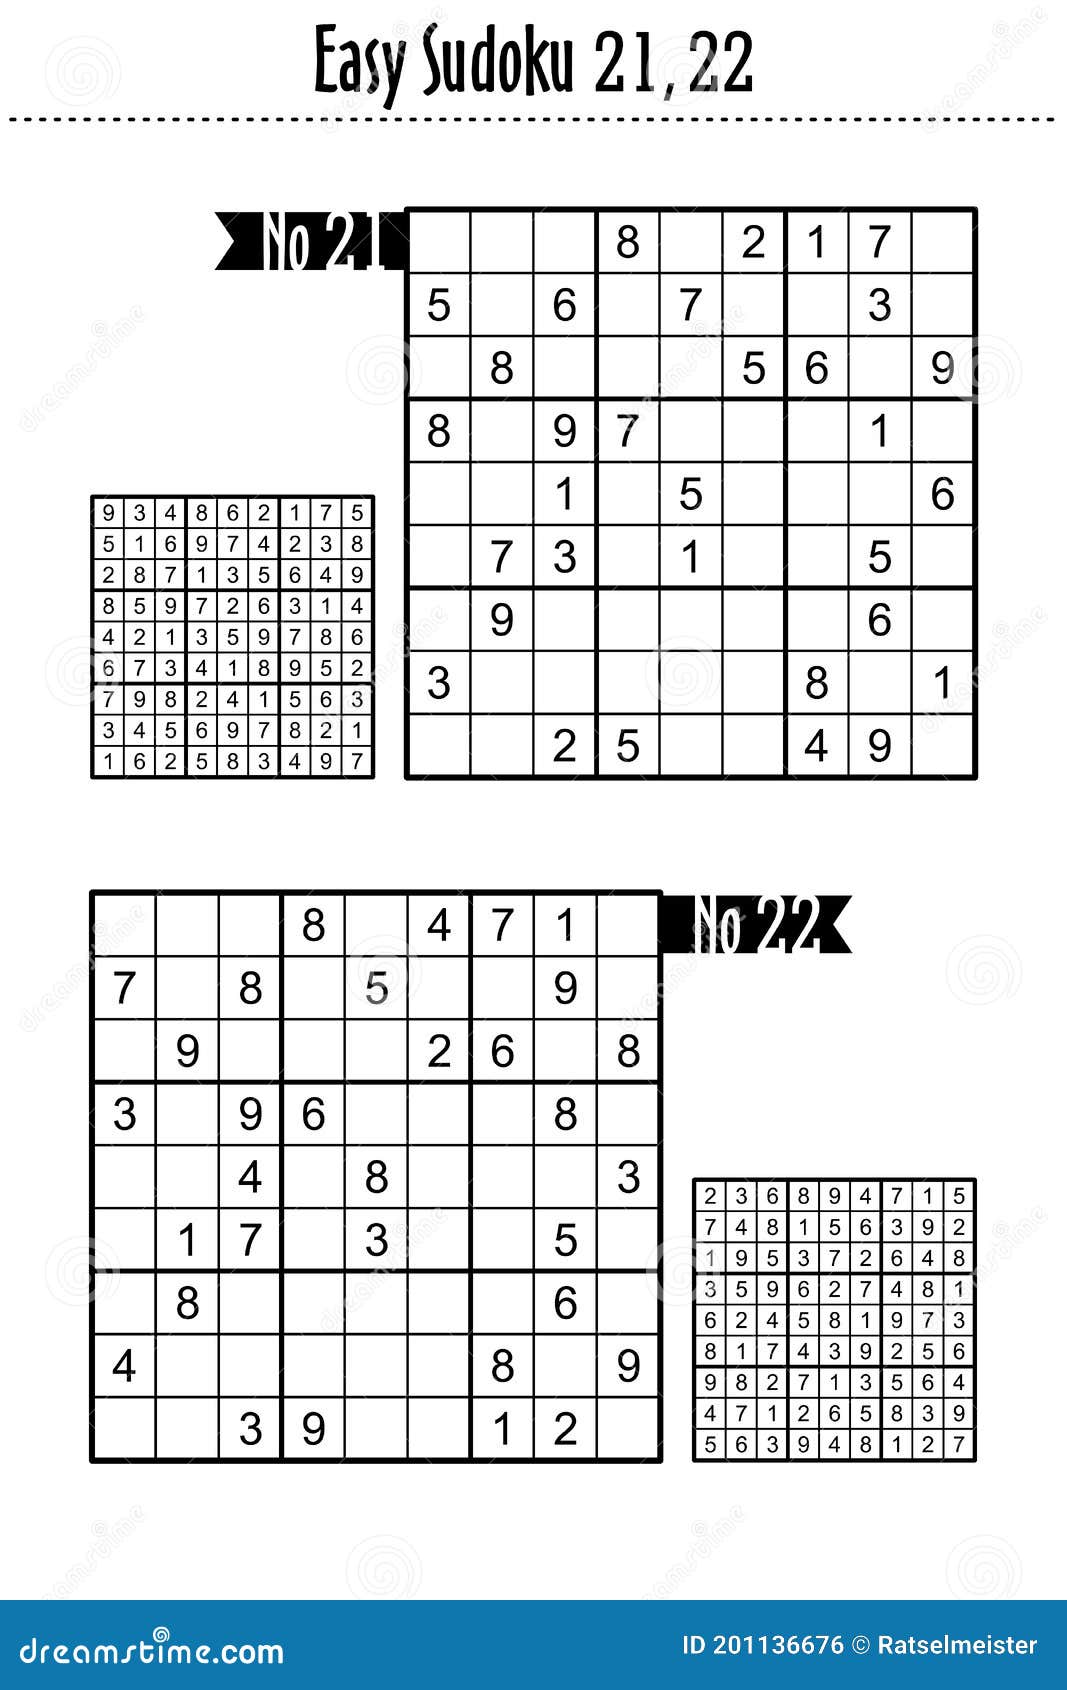 two easy level sudoku puzzles, no 21 and no 22